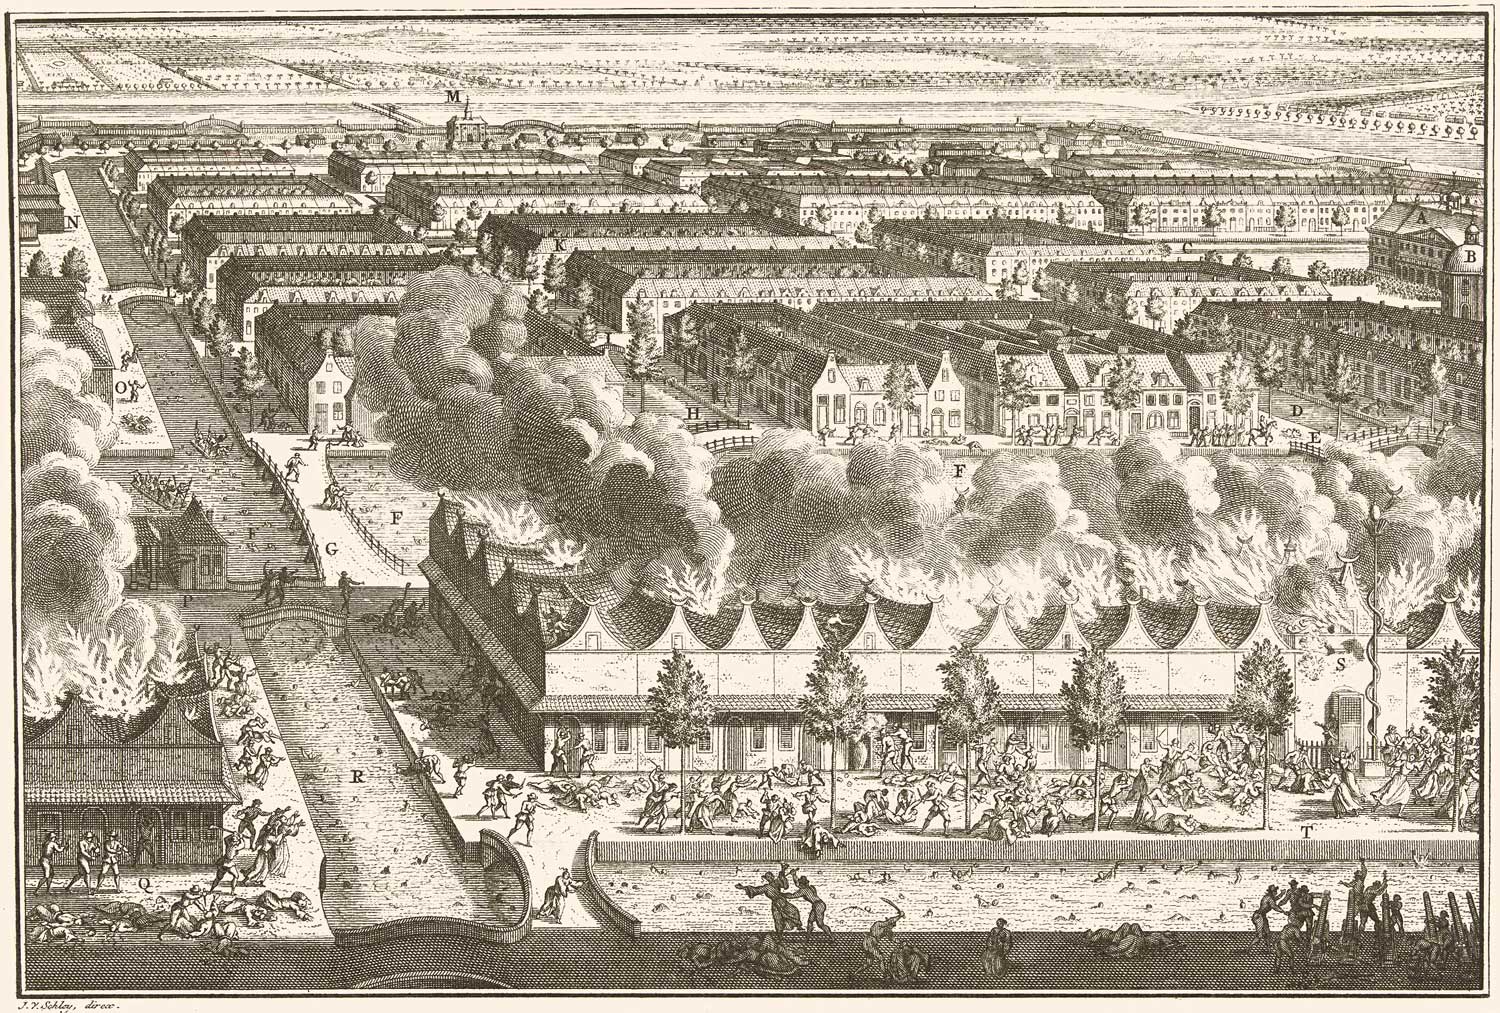 Line illustration of the Batavia Massacre, a massacre in which thousands of ethnic Chinese people were killed on Java in 1740. The illustration shows a city with rows of buildings, with the nears row engulfed in flames. In front of the burning buildings, people can be seen attacking other people.